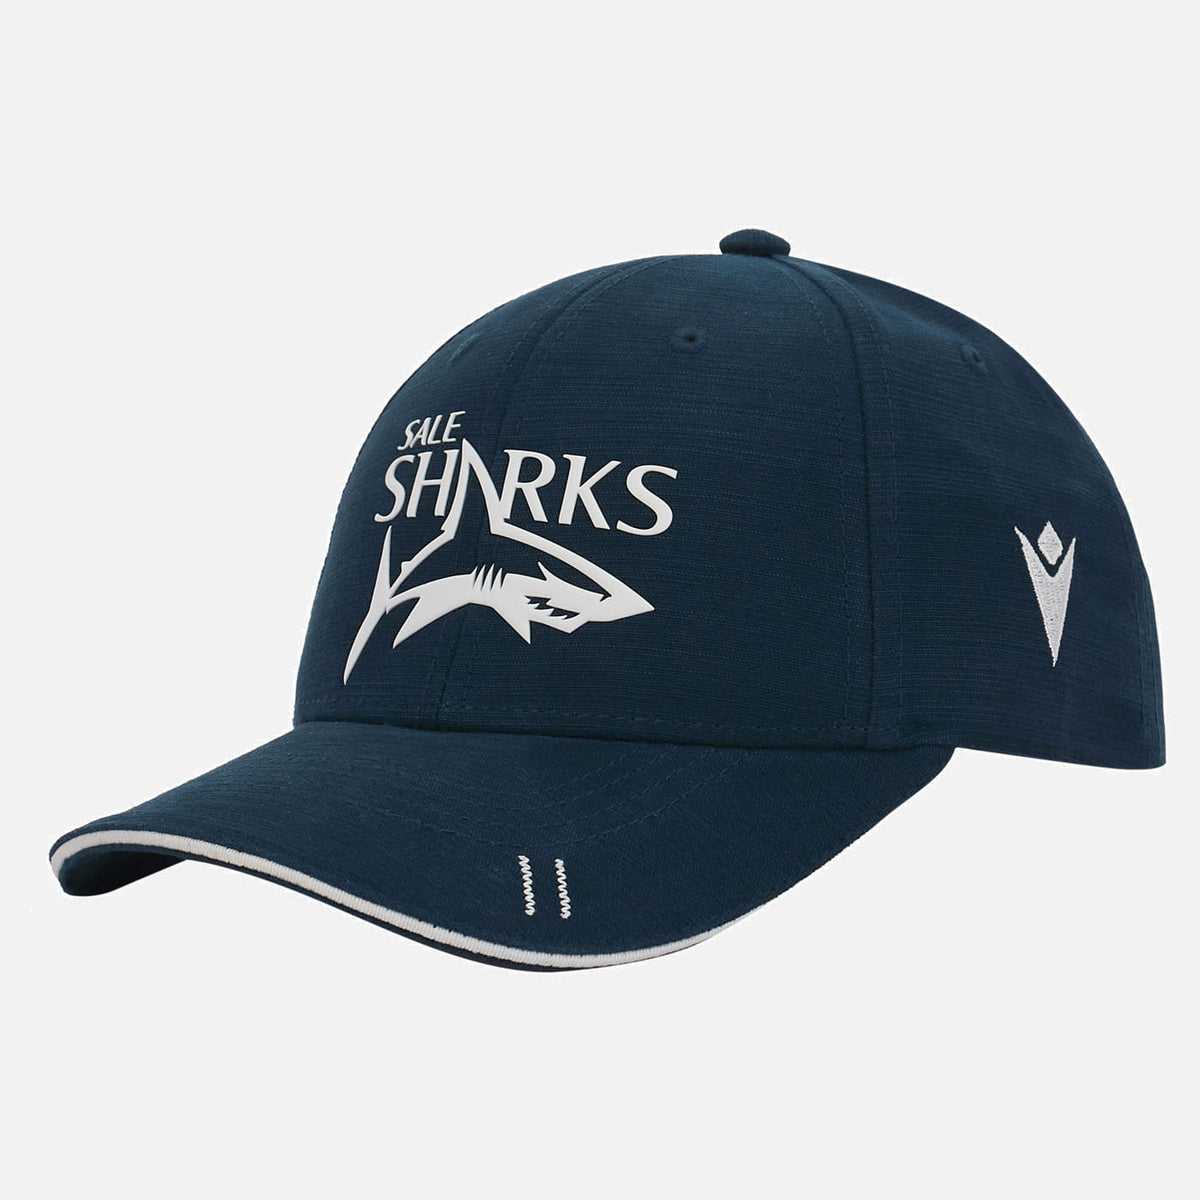 Cappellino Rugby Sale Sharks con Visiera